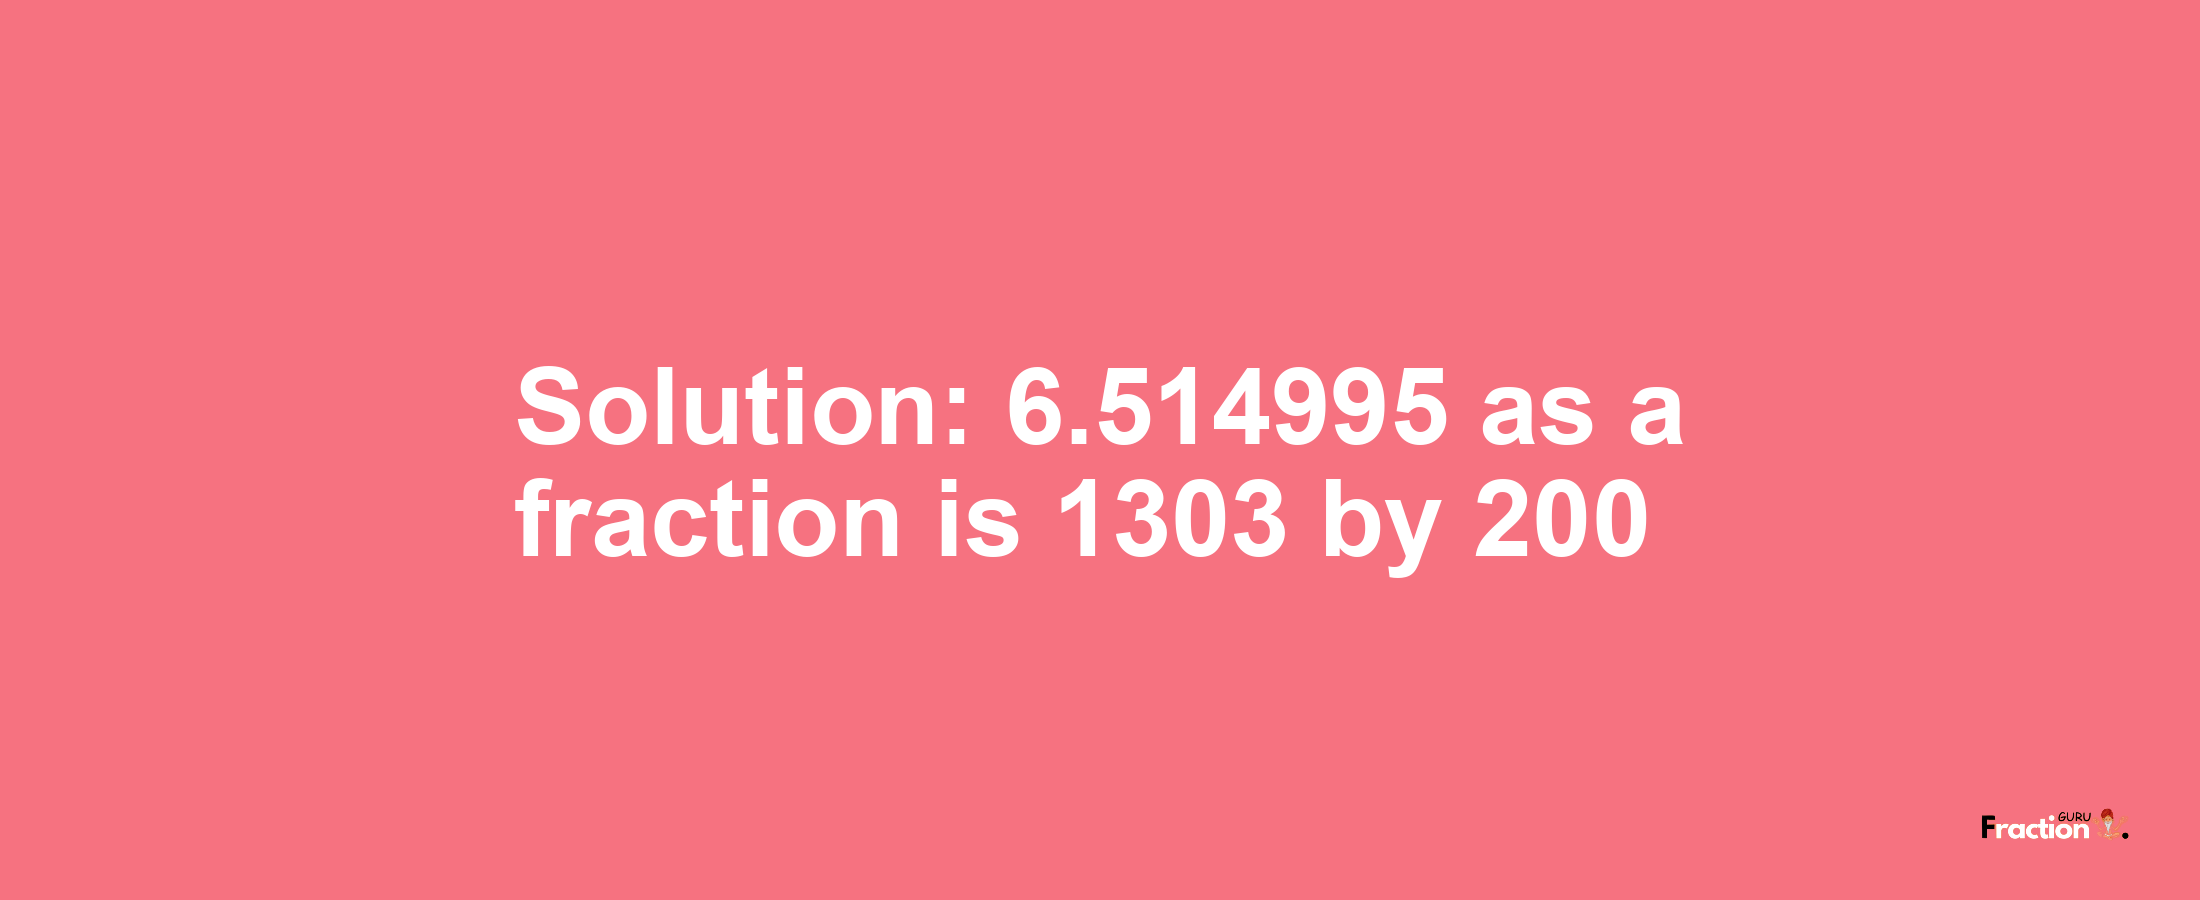 Solution:6.514995 as a fraction is 1303/200